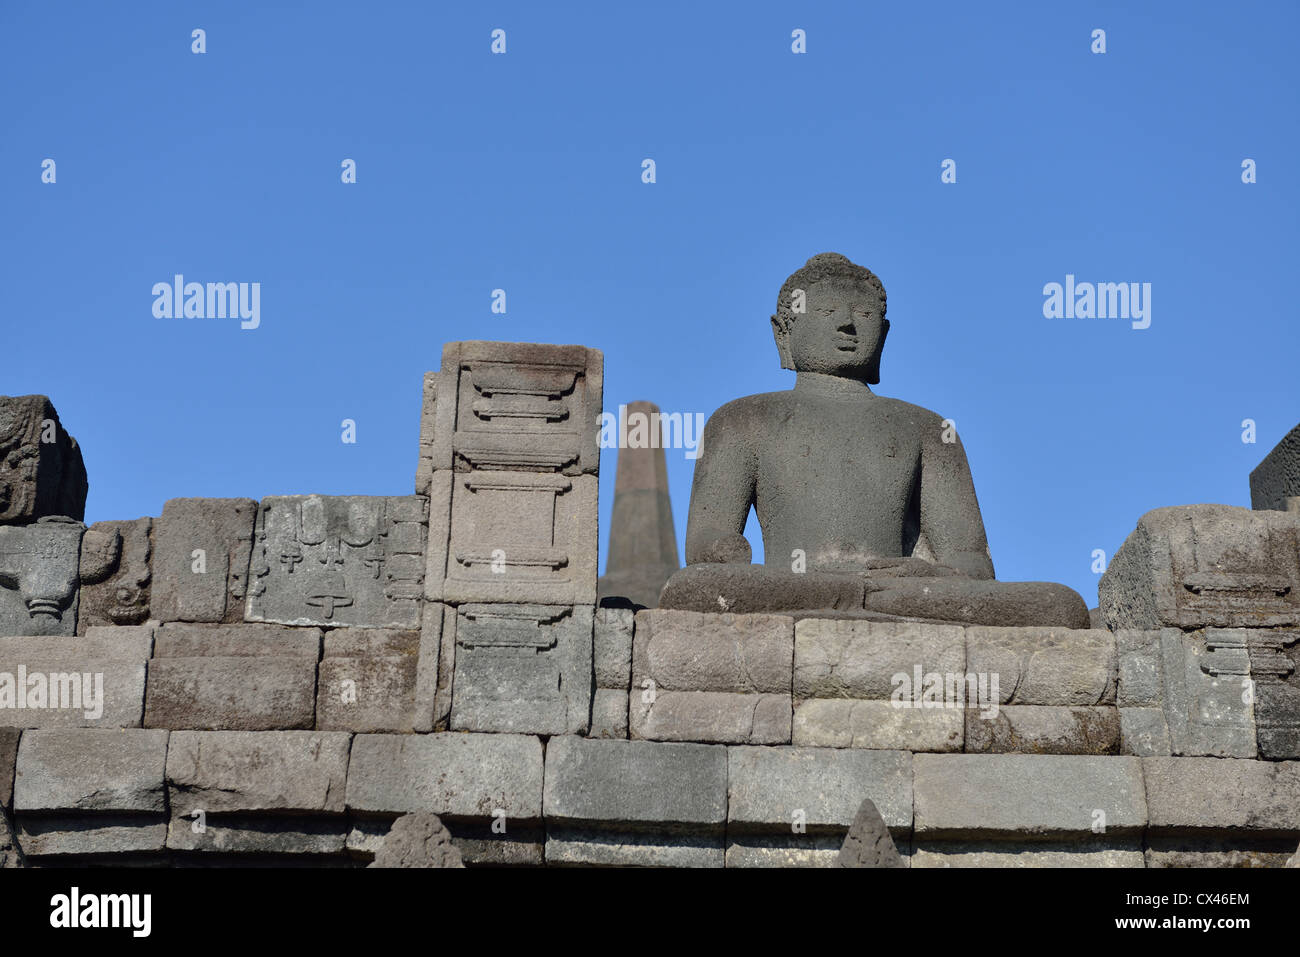 One of the statues of Buddha at the temple of Borobudur; Central Java, Indonesia. Stock Photo